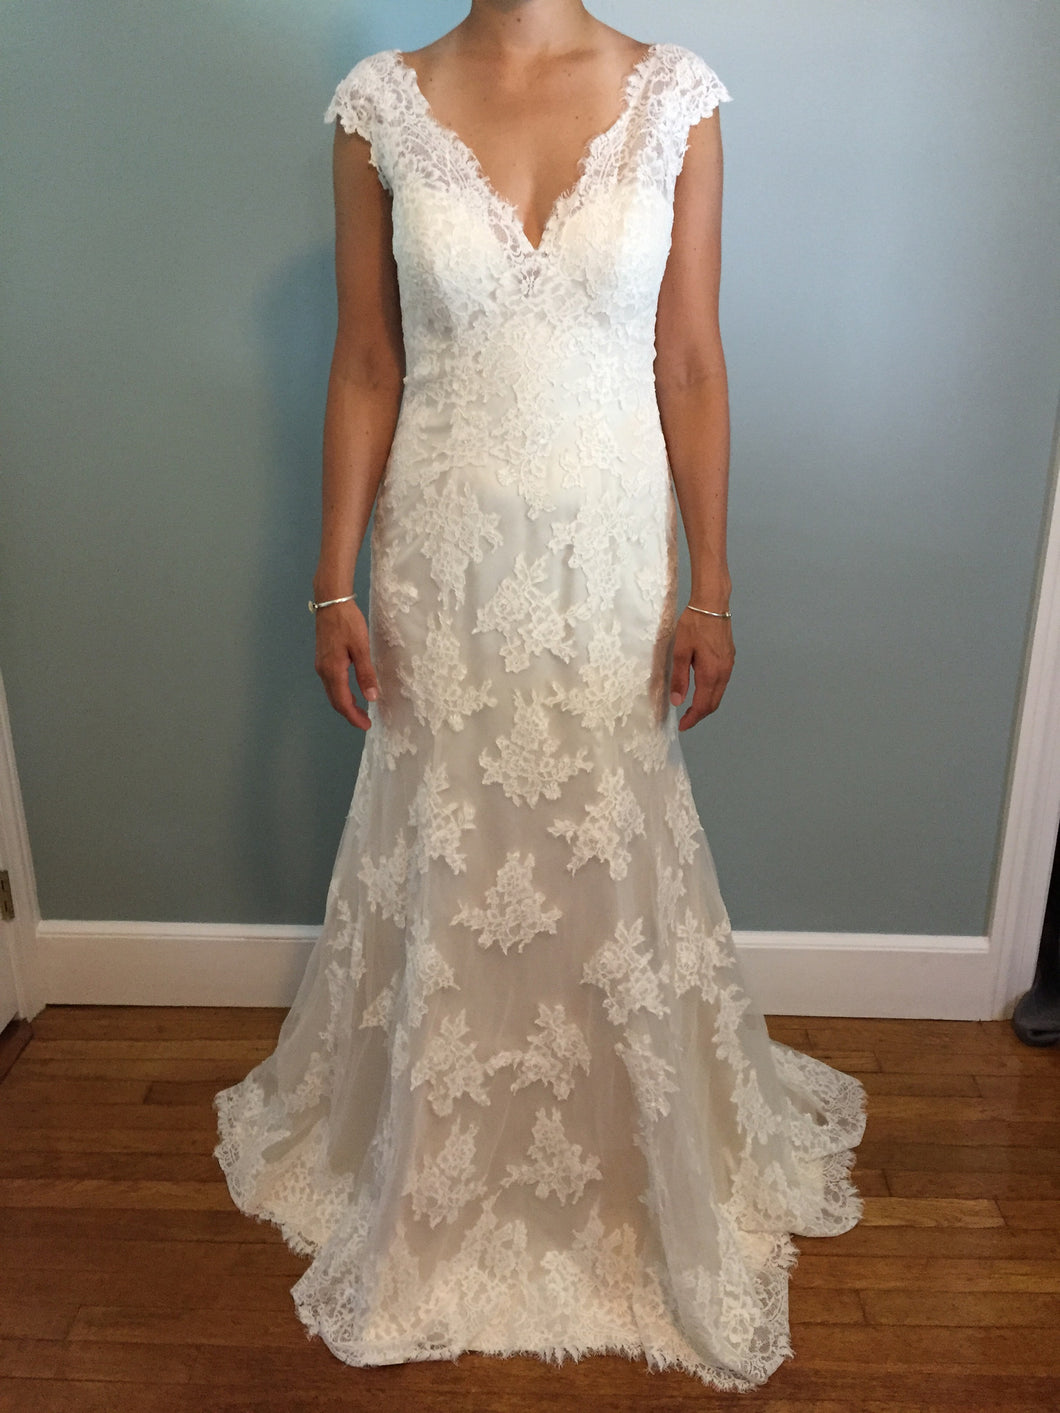 Maggie Sottero 'Shayla' - Maggie Sottero - Nearly Newlywed Bridal Boutique - 1